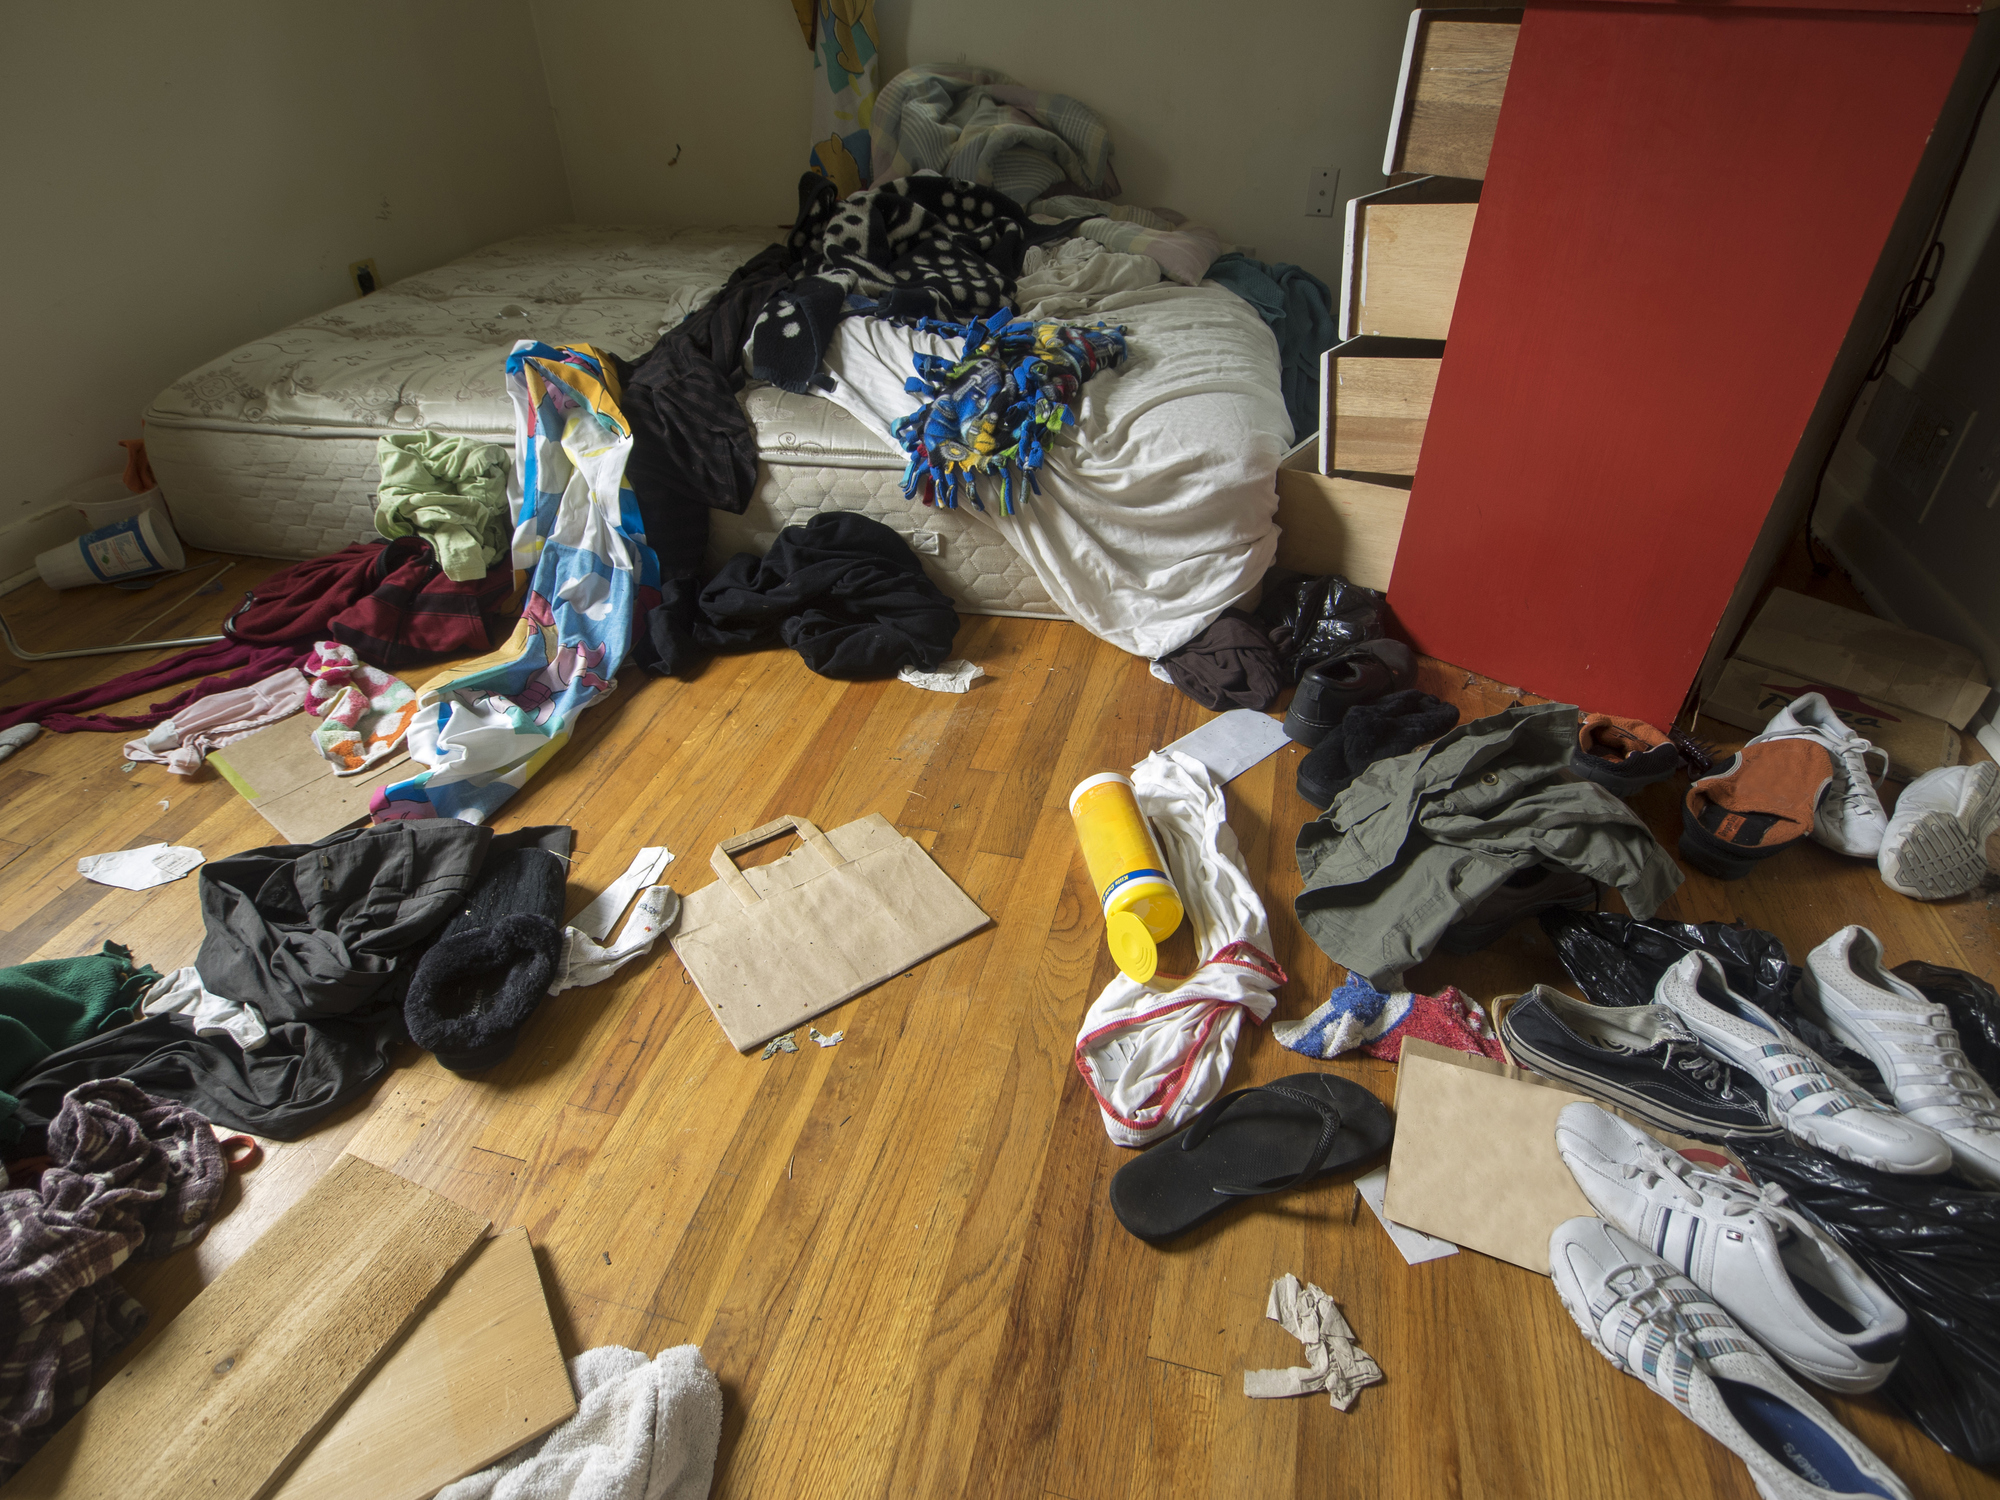 A dirty room with clothes and trash on the floor